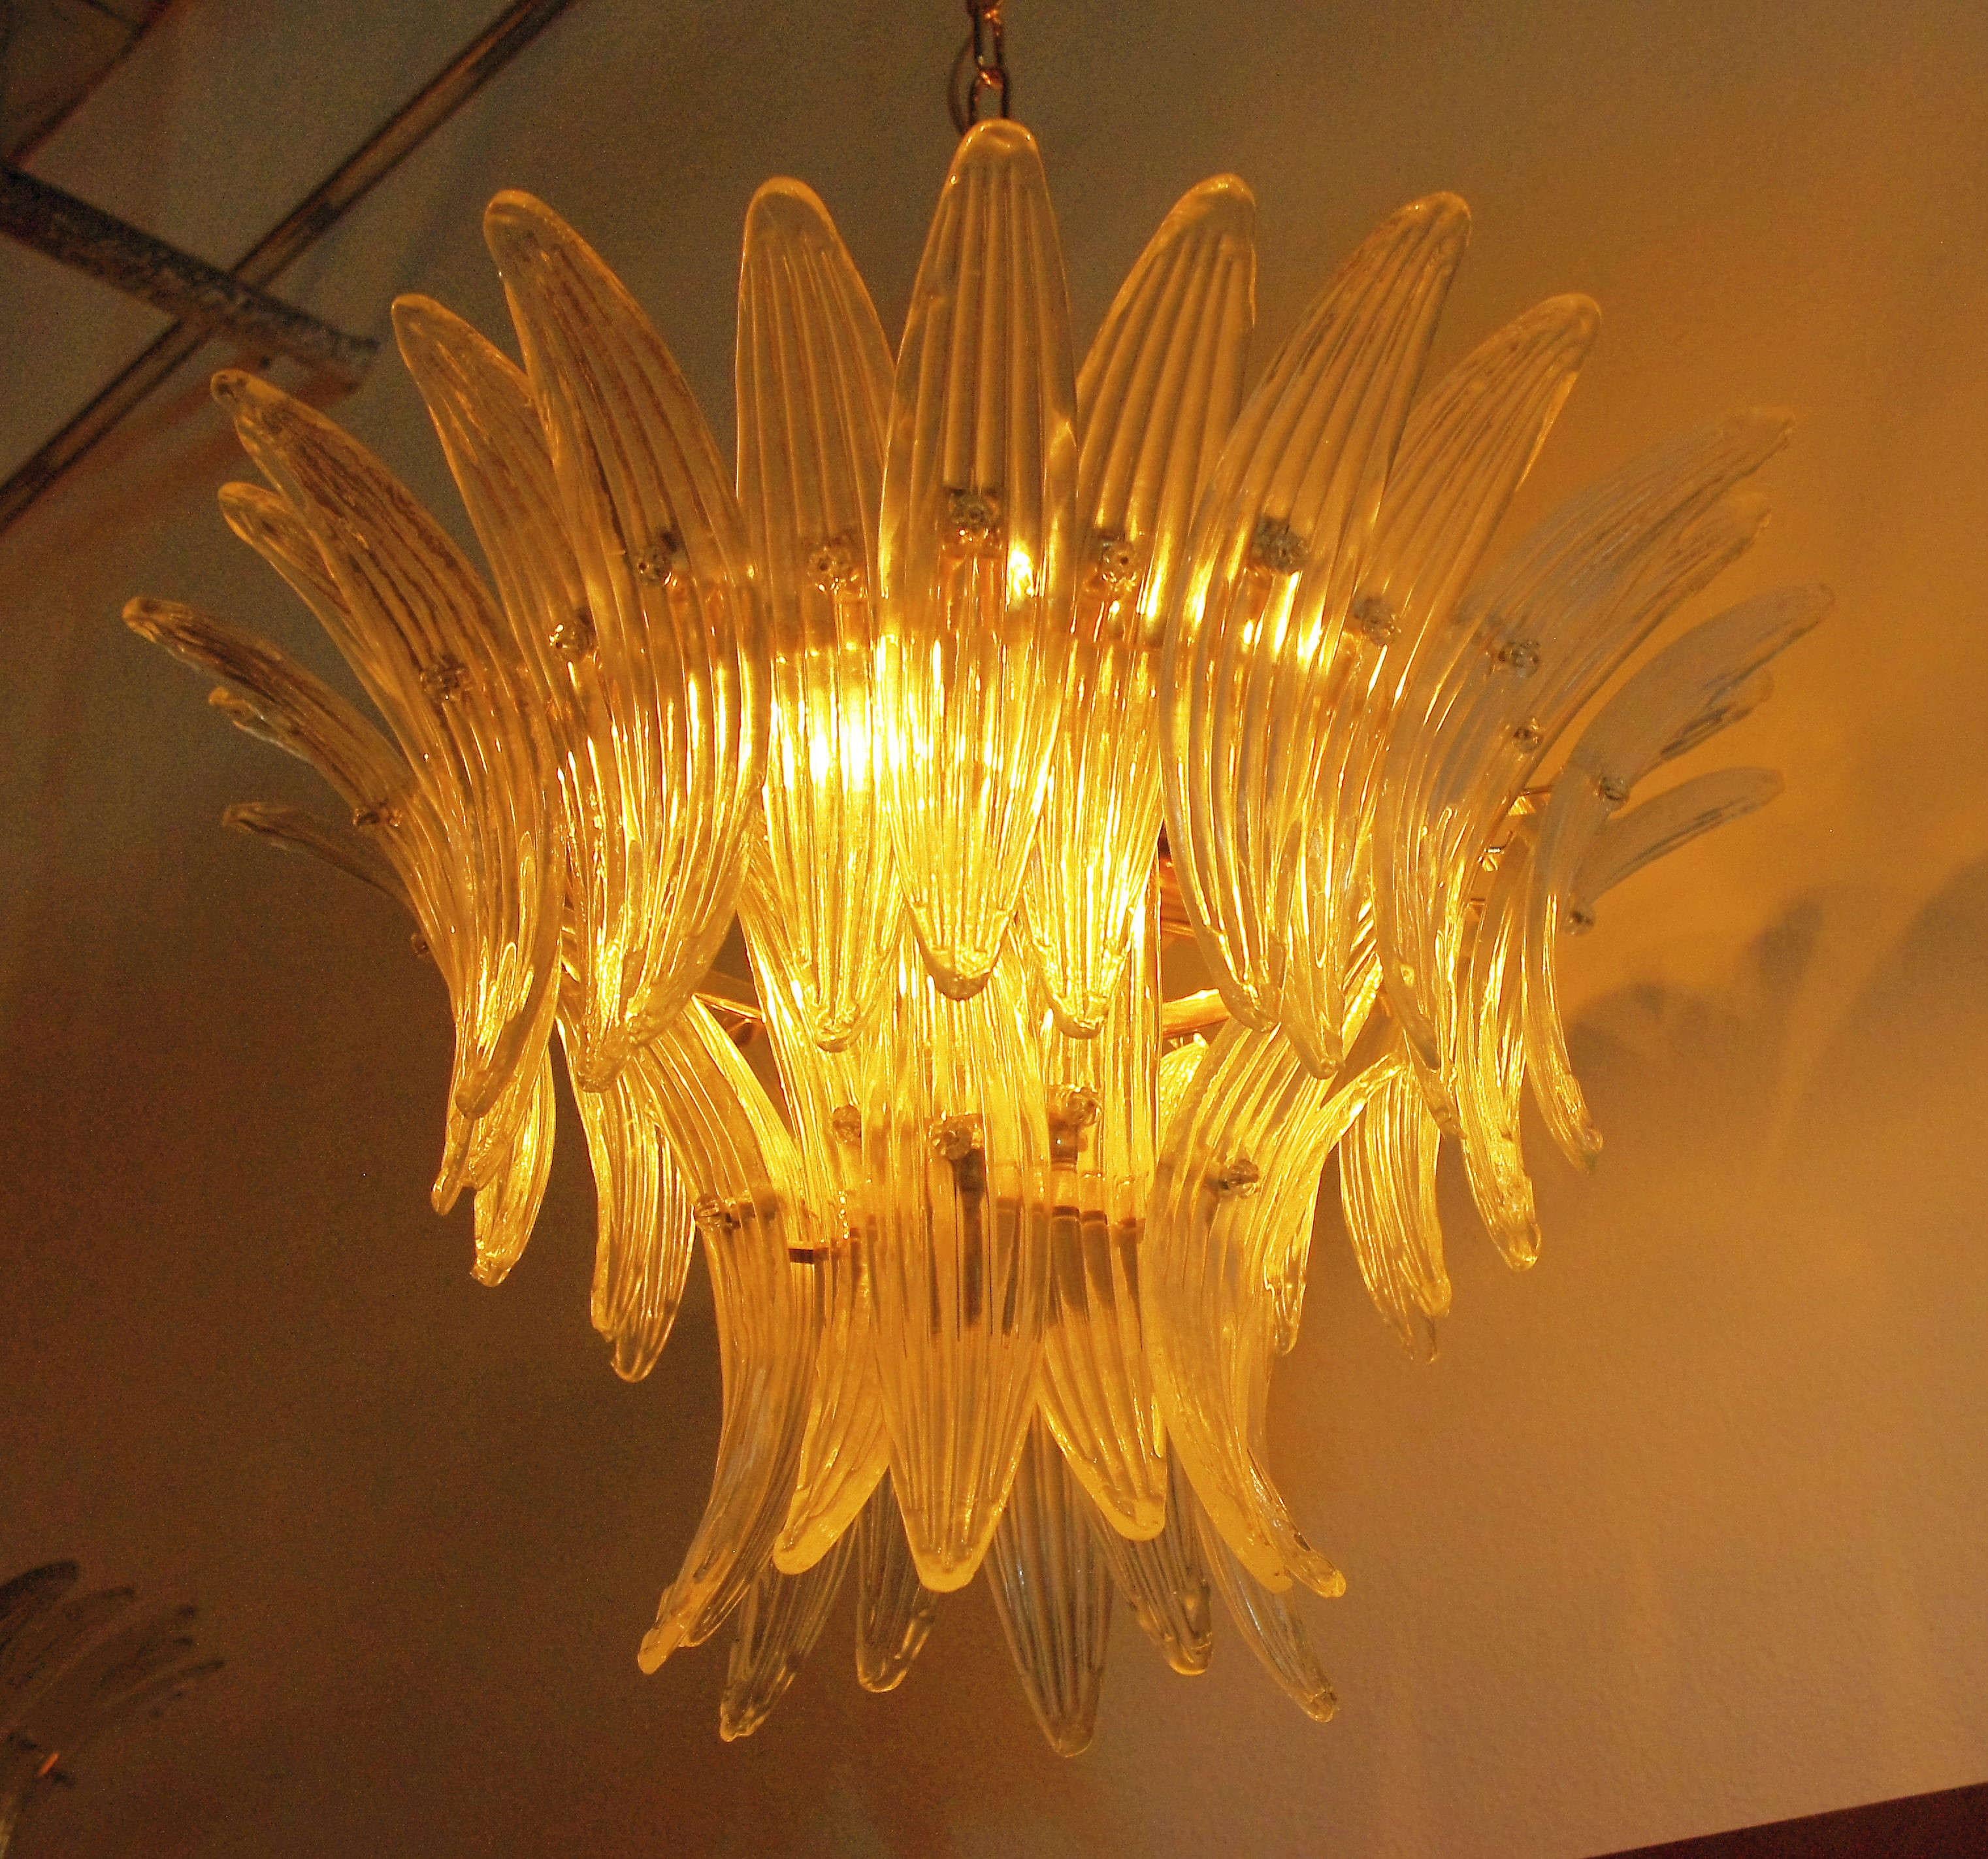 Italian Palmette chandelier with clear Murano glass leaves mounted on 24-karat gold plated metal finish / Made in Italy
6 lights / E26 or E27 type / max 60W each
Diameter: 25 inches / Height: 16 inches plus chain and canopy
Order only / This item